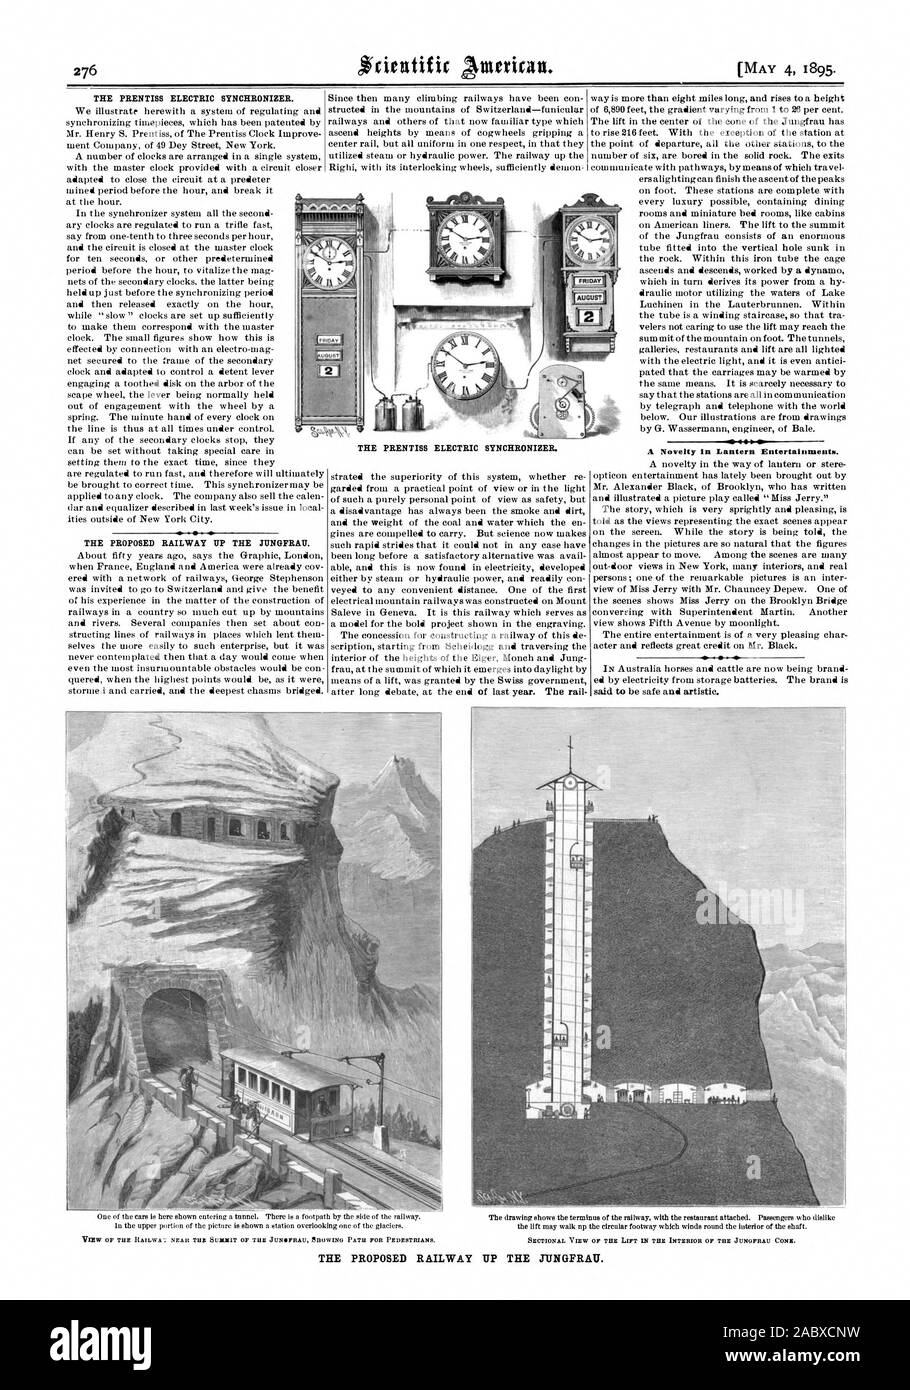 THE PRENTISS ELECTRIC SYNCHRONIZER. THE PROPOSED RAILWAY UP THE JIINGFRAII. A Novelty In Lantern Entertainments. VIEW OF THE RAILWA': NEAR THE SUMMIT OF THE JUNISFRAU SHOWING PATH FOR PEDESTRIANS THE PROPOSED RAILWAY 'UP THE IIINGERAU., scientific american, 1895-05-04 Stock Photo